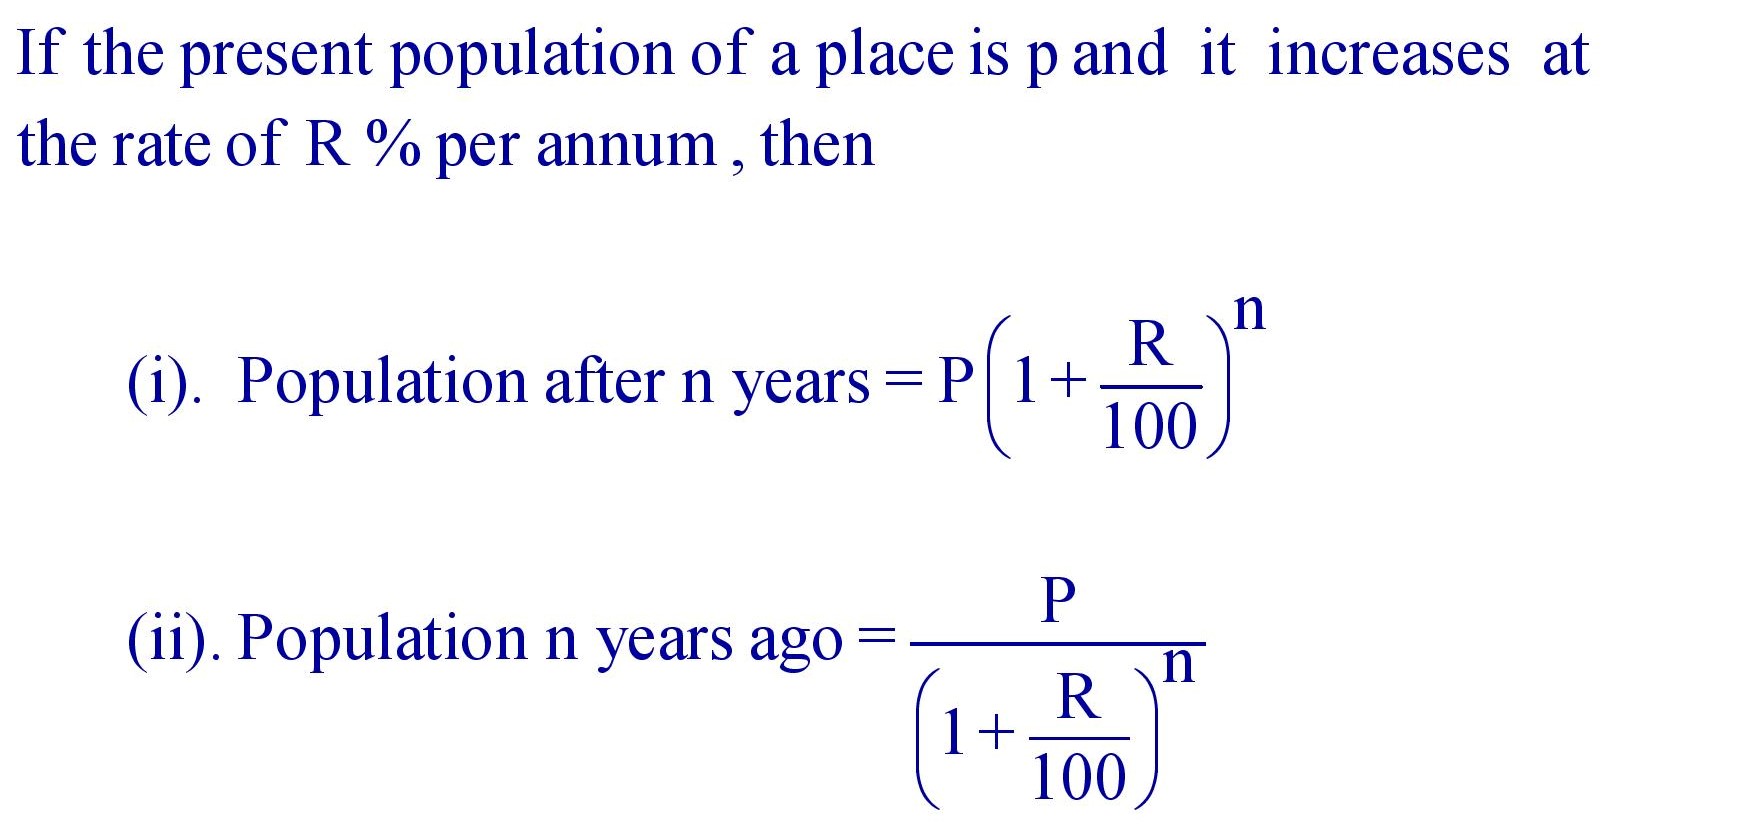 If the present population of a place is p and it increases at the rate of R % per annum , then 